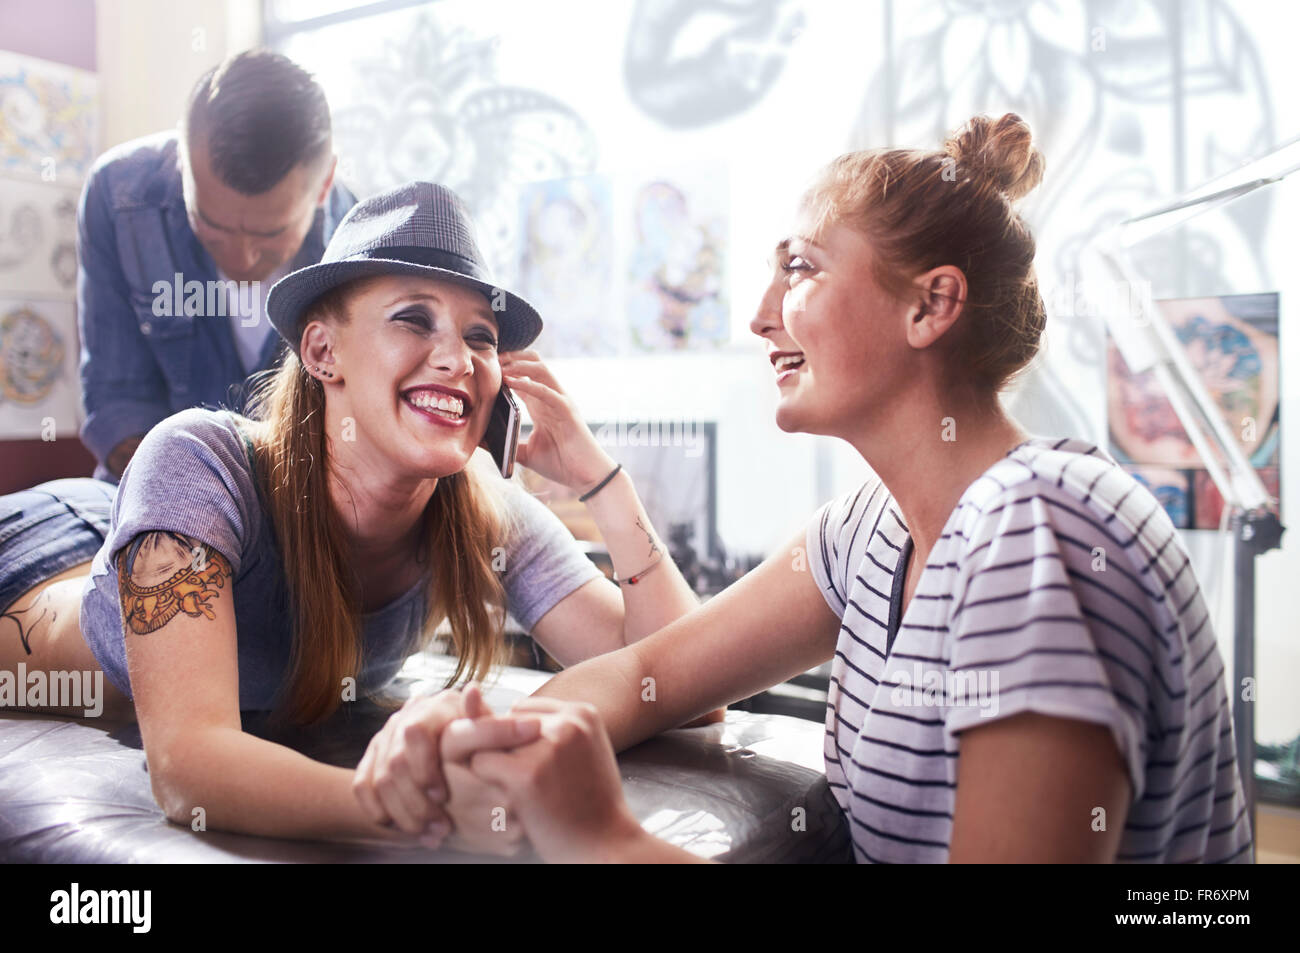 Smiling woman with friend getting tattoo Stock Photo